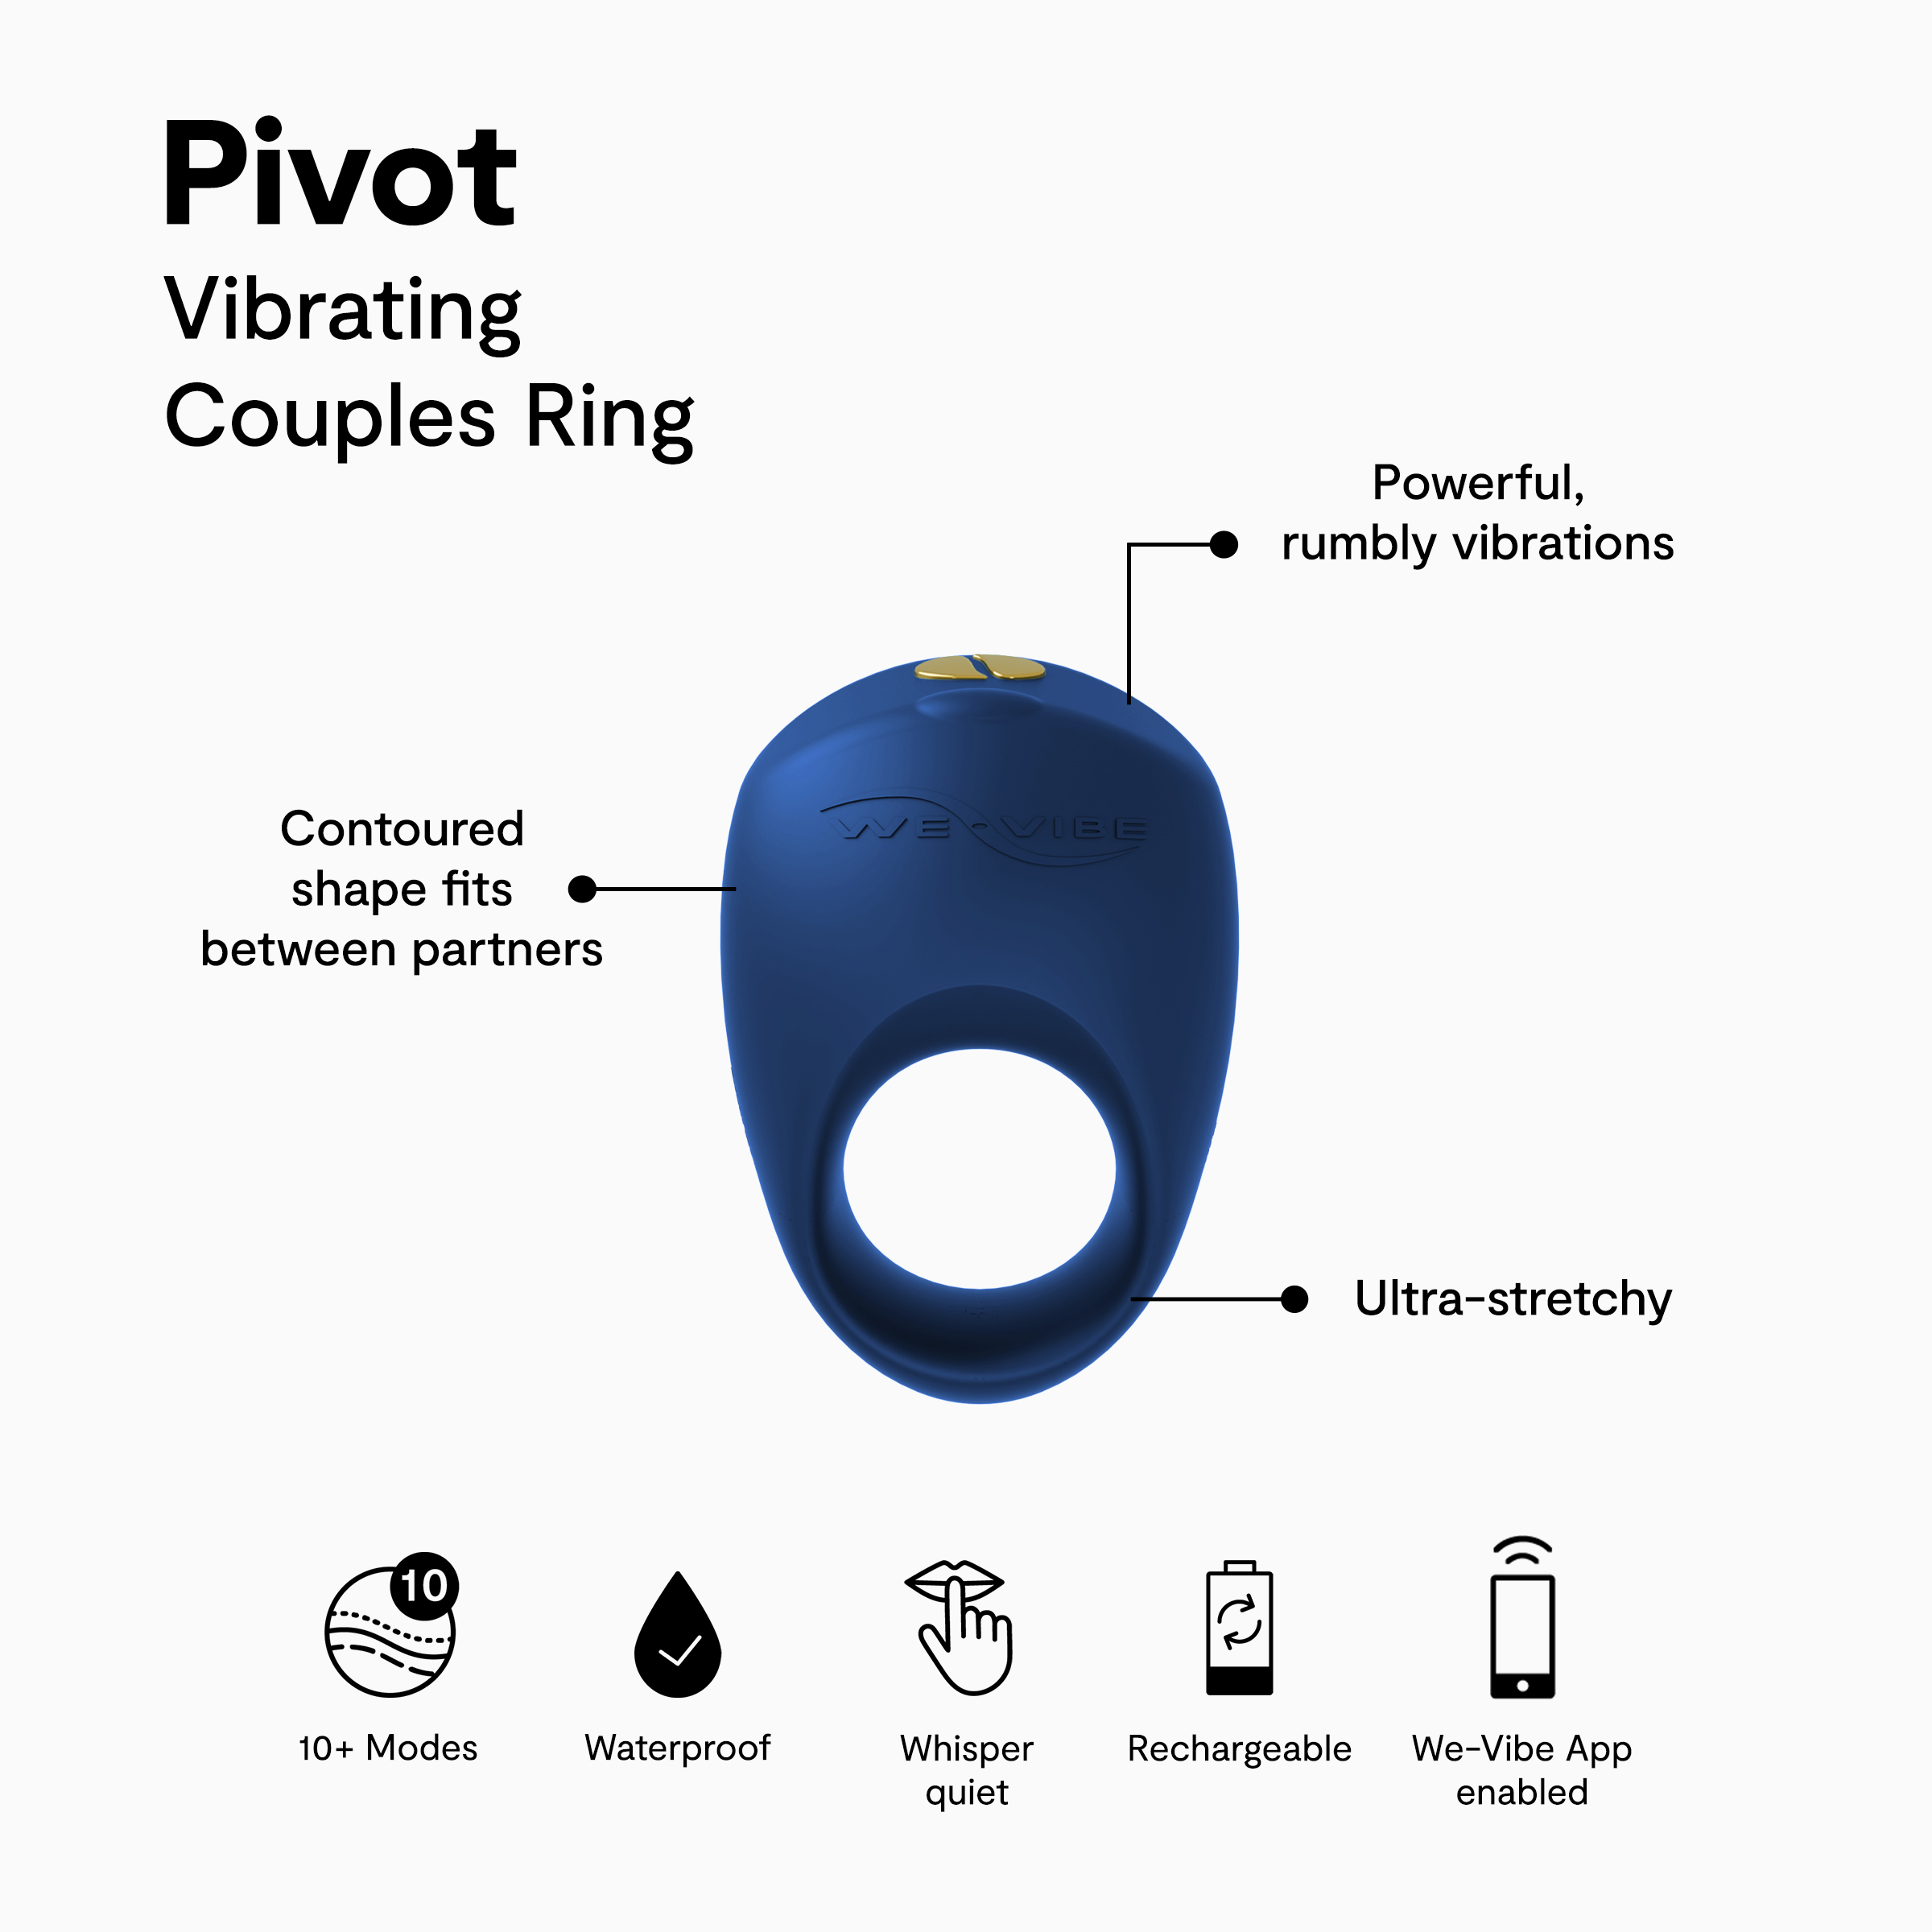 We-Vibe Pivot Wearable Vibrating Ring with Remote and App, Blue - image 2 of 9